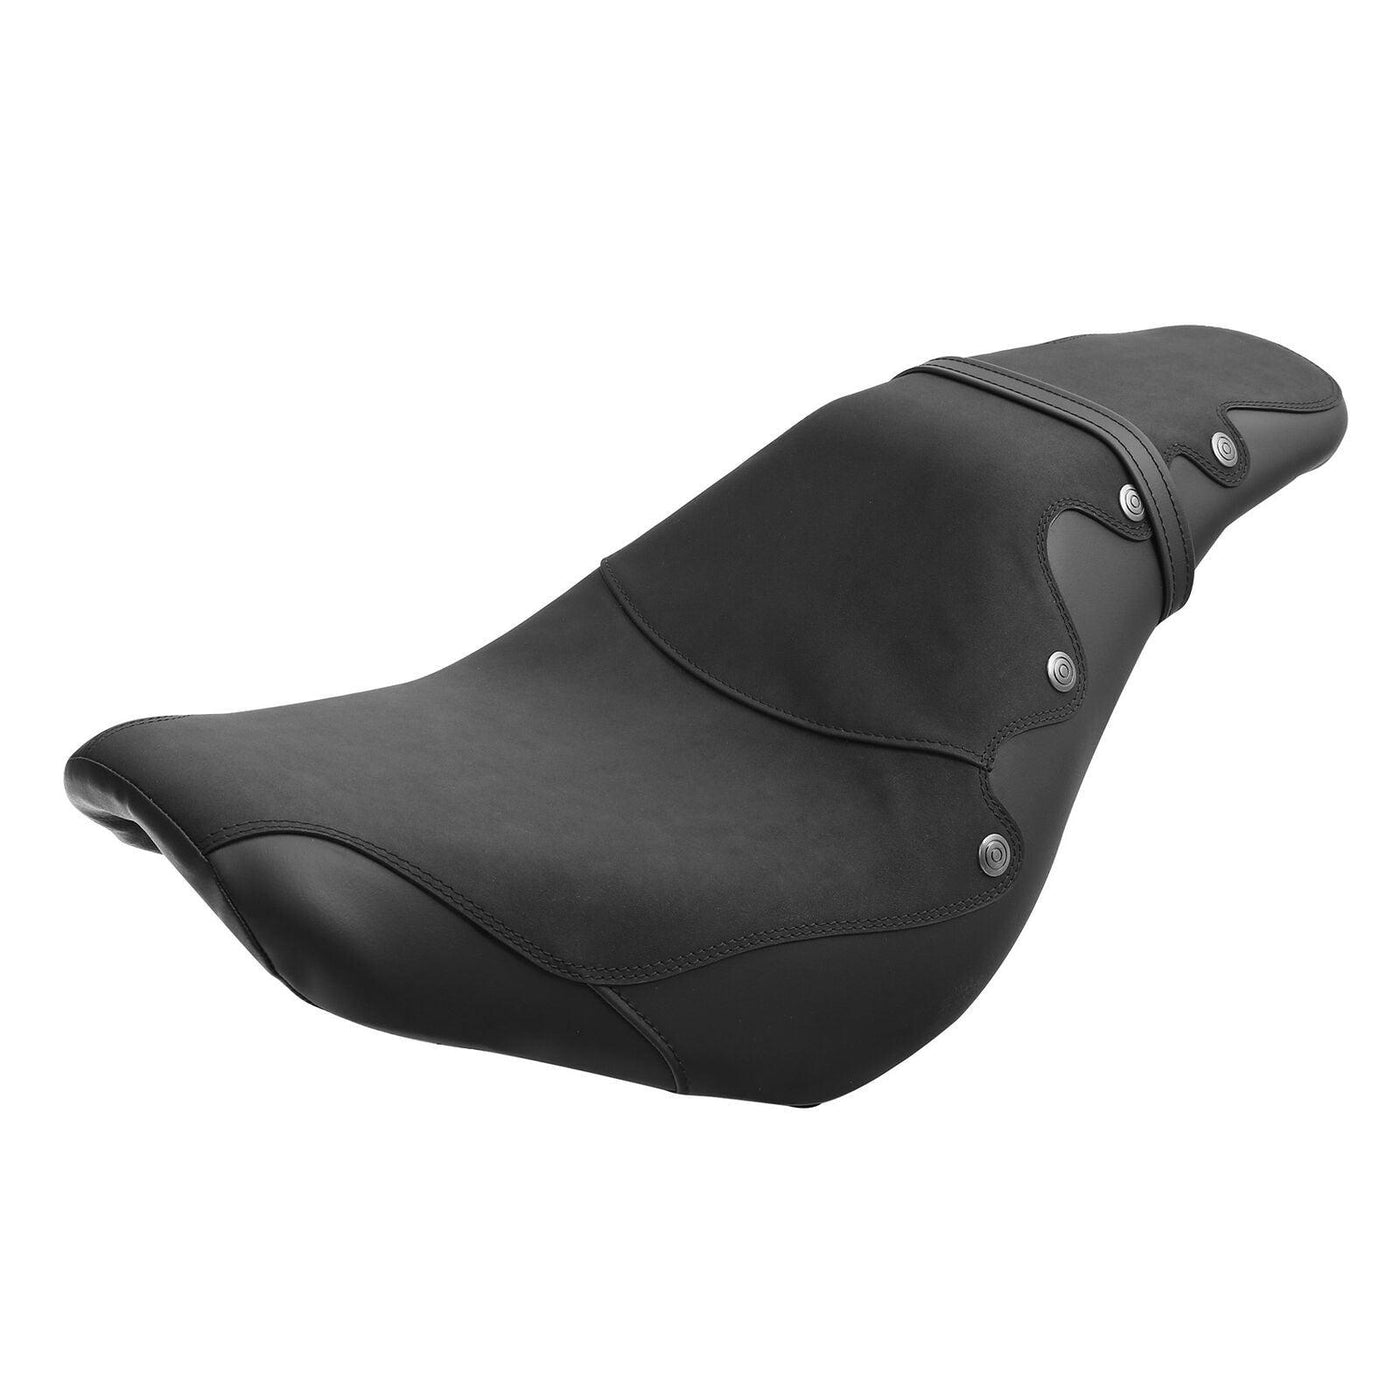 Driver Passenger Two Up Seat Fit For Harley Softail Slim FLSL Street Bob 2018-21 - Moto Life Products